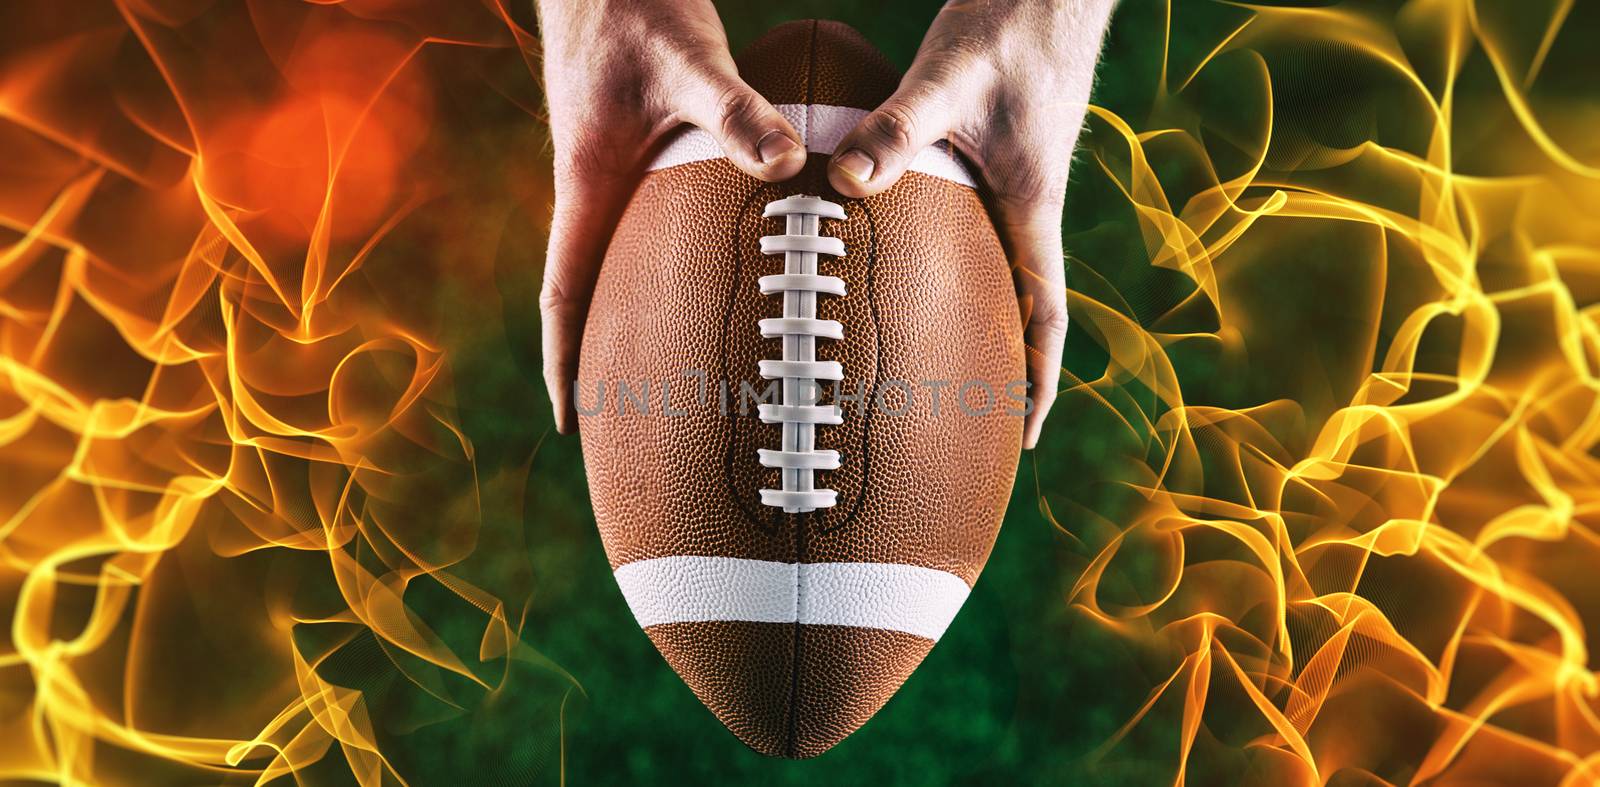 American football player holding up football against abstract orange glowing black background